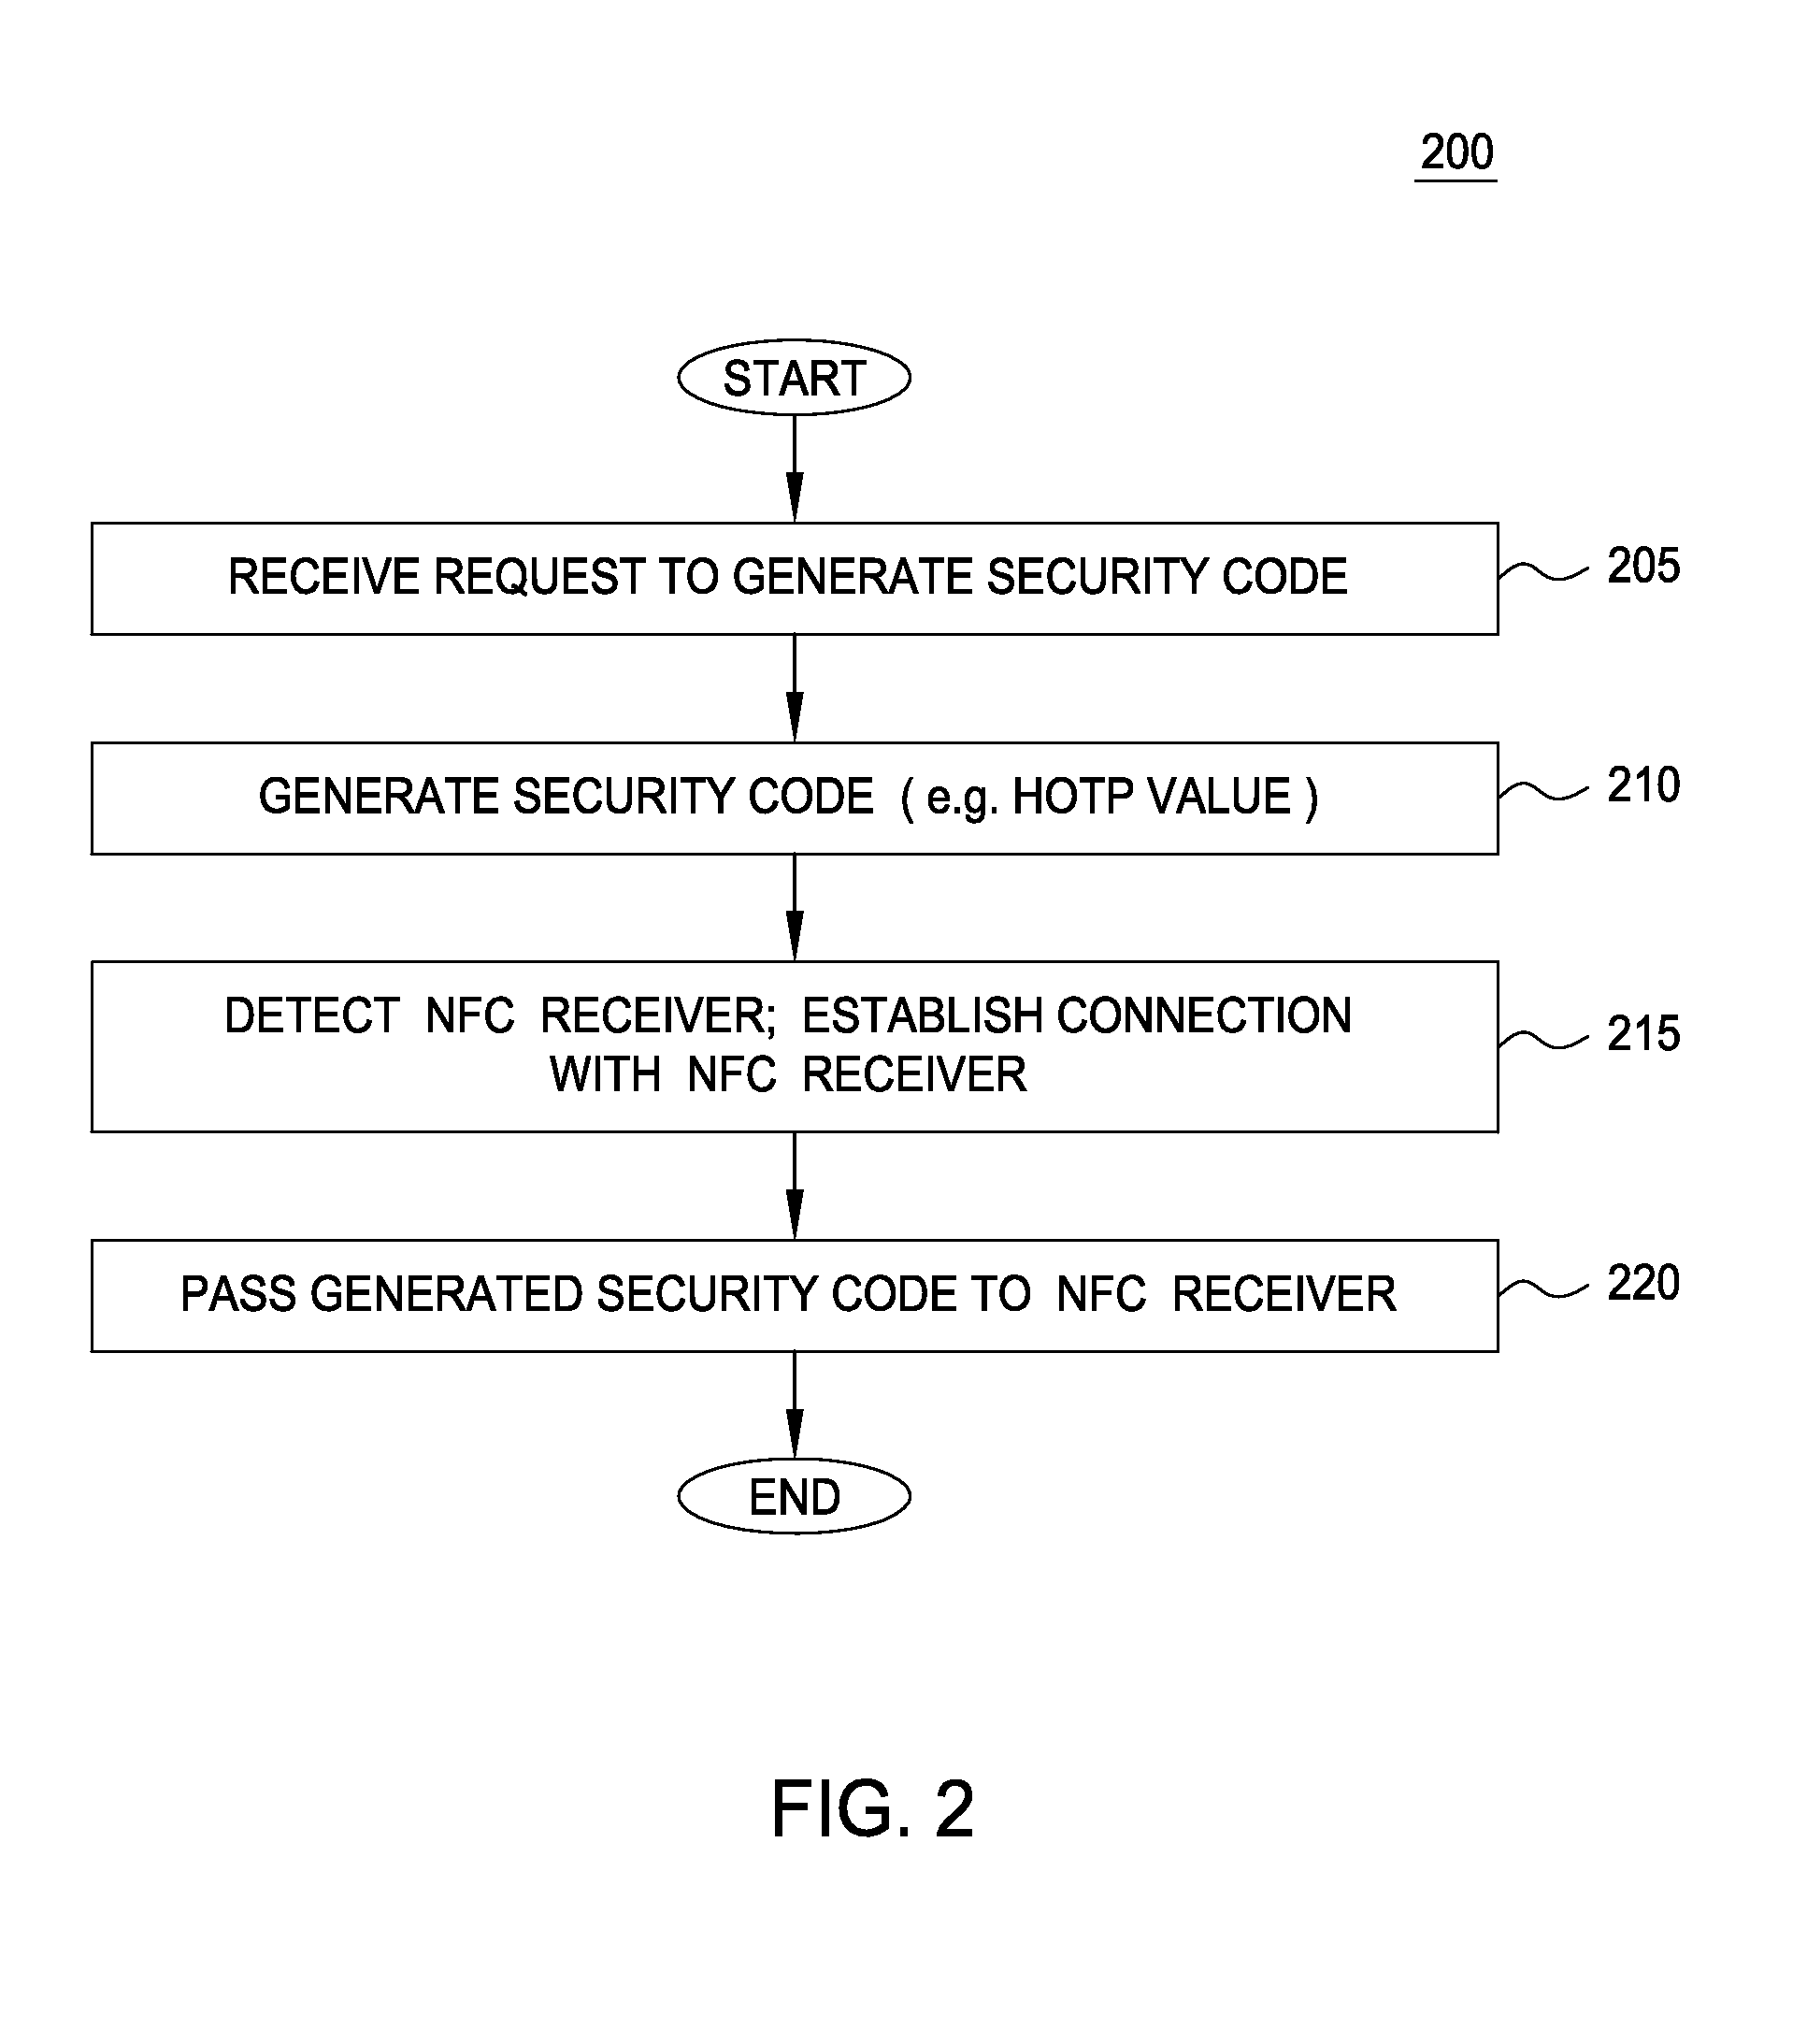 Supporting proximity based security code transfer from mobile/tablet application to access device